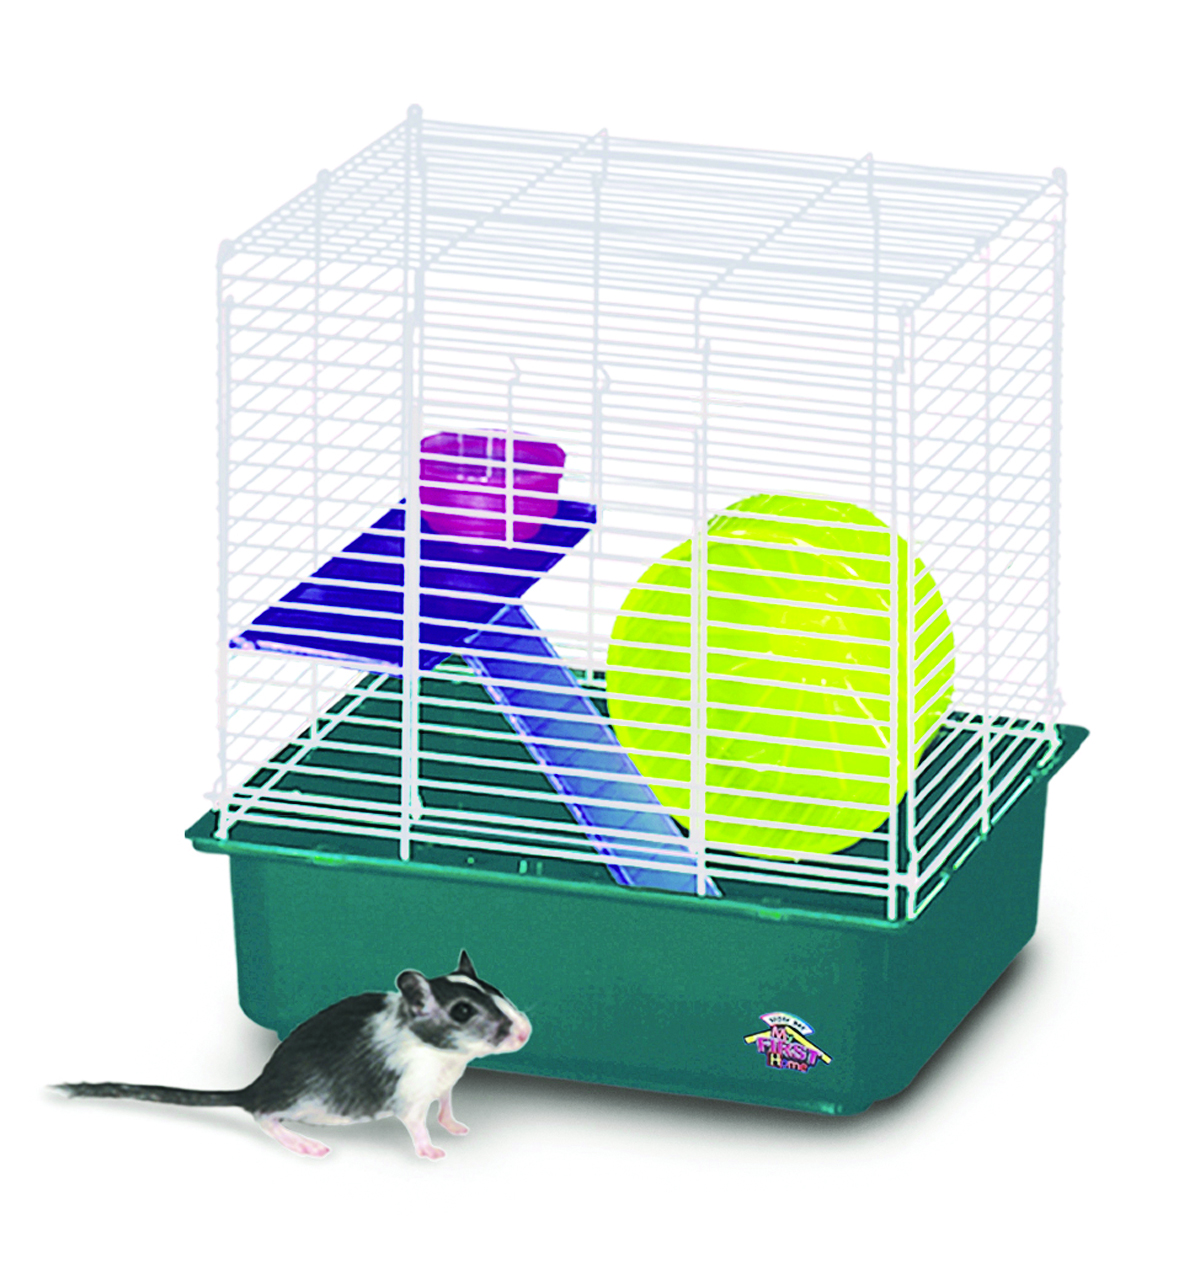 My First Hamster Home, 2-Story 4-Pack